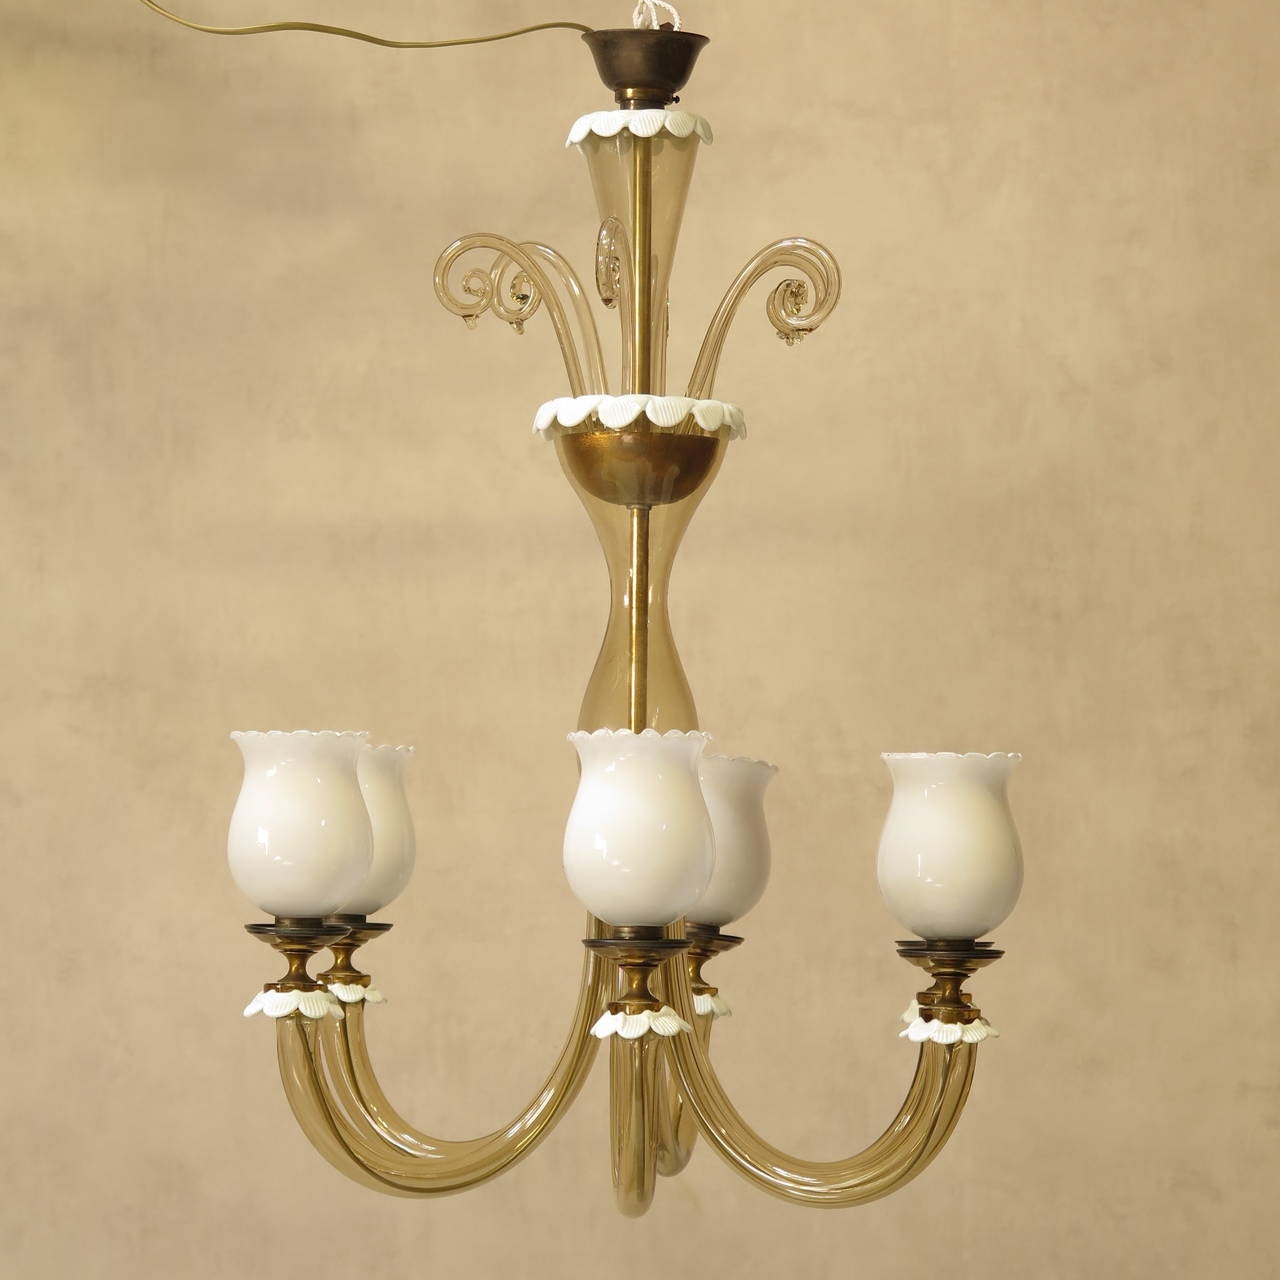 Elegant six-light venetian chandelier in amber-coloured glass, with milk glass bobeches and crimped decor.